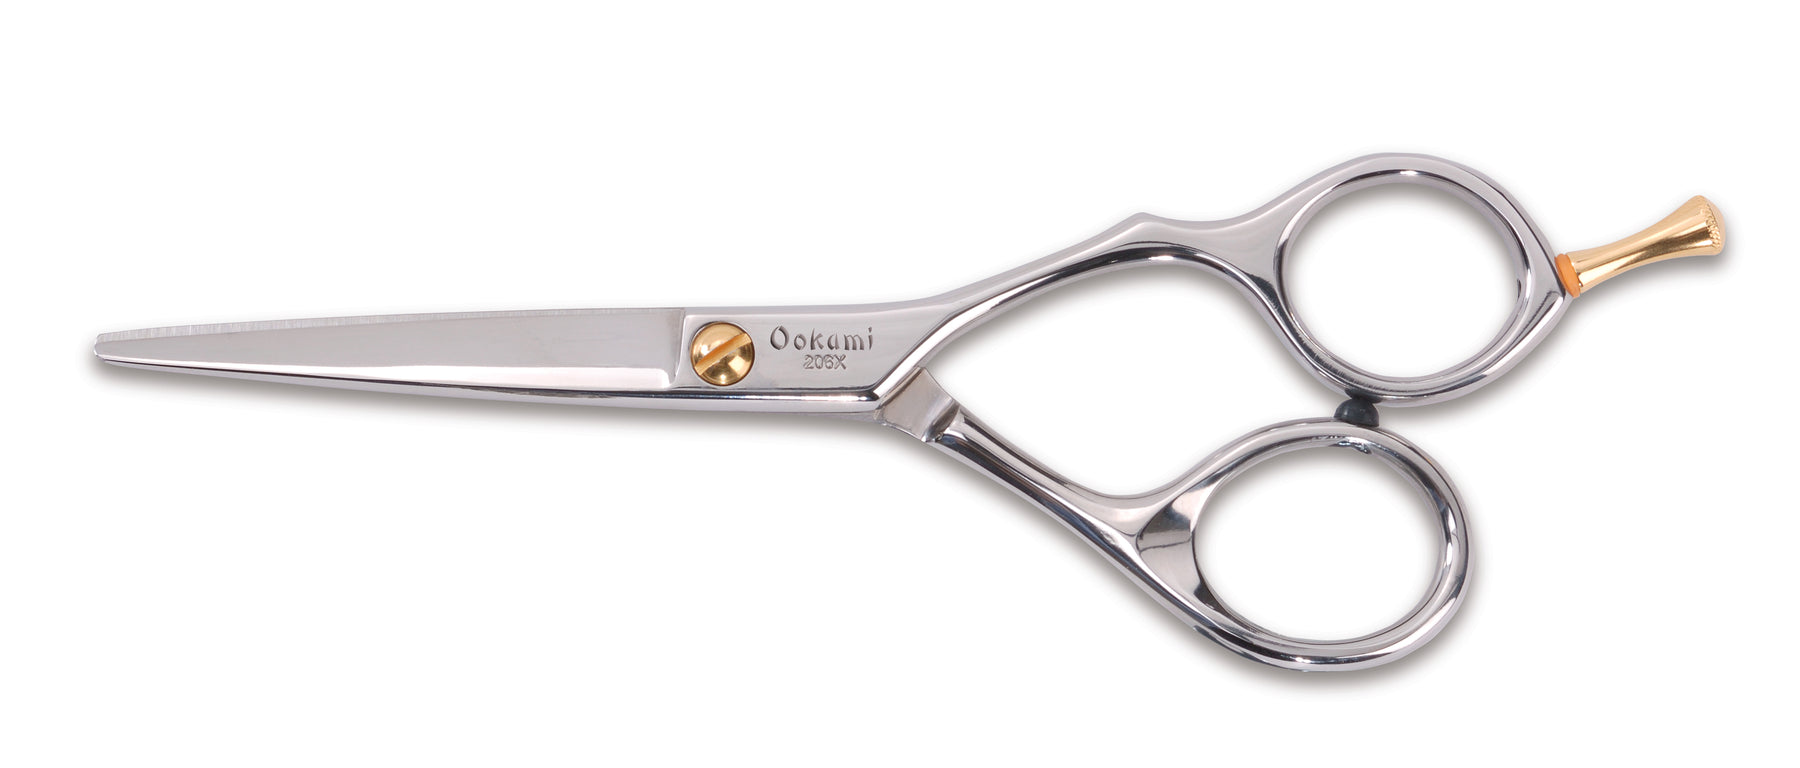 Ookami® 5.5" Offset Butterfly Handle Beauty Shears